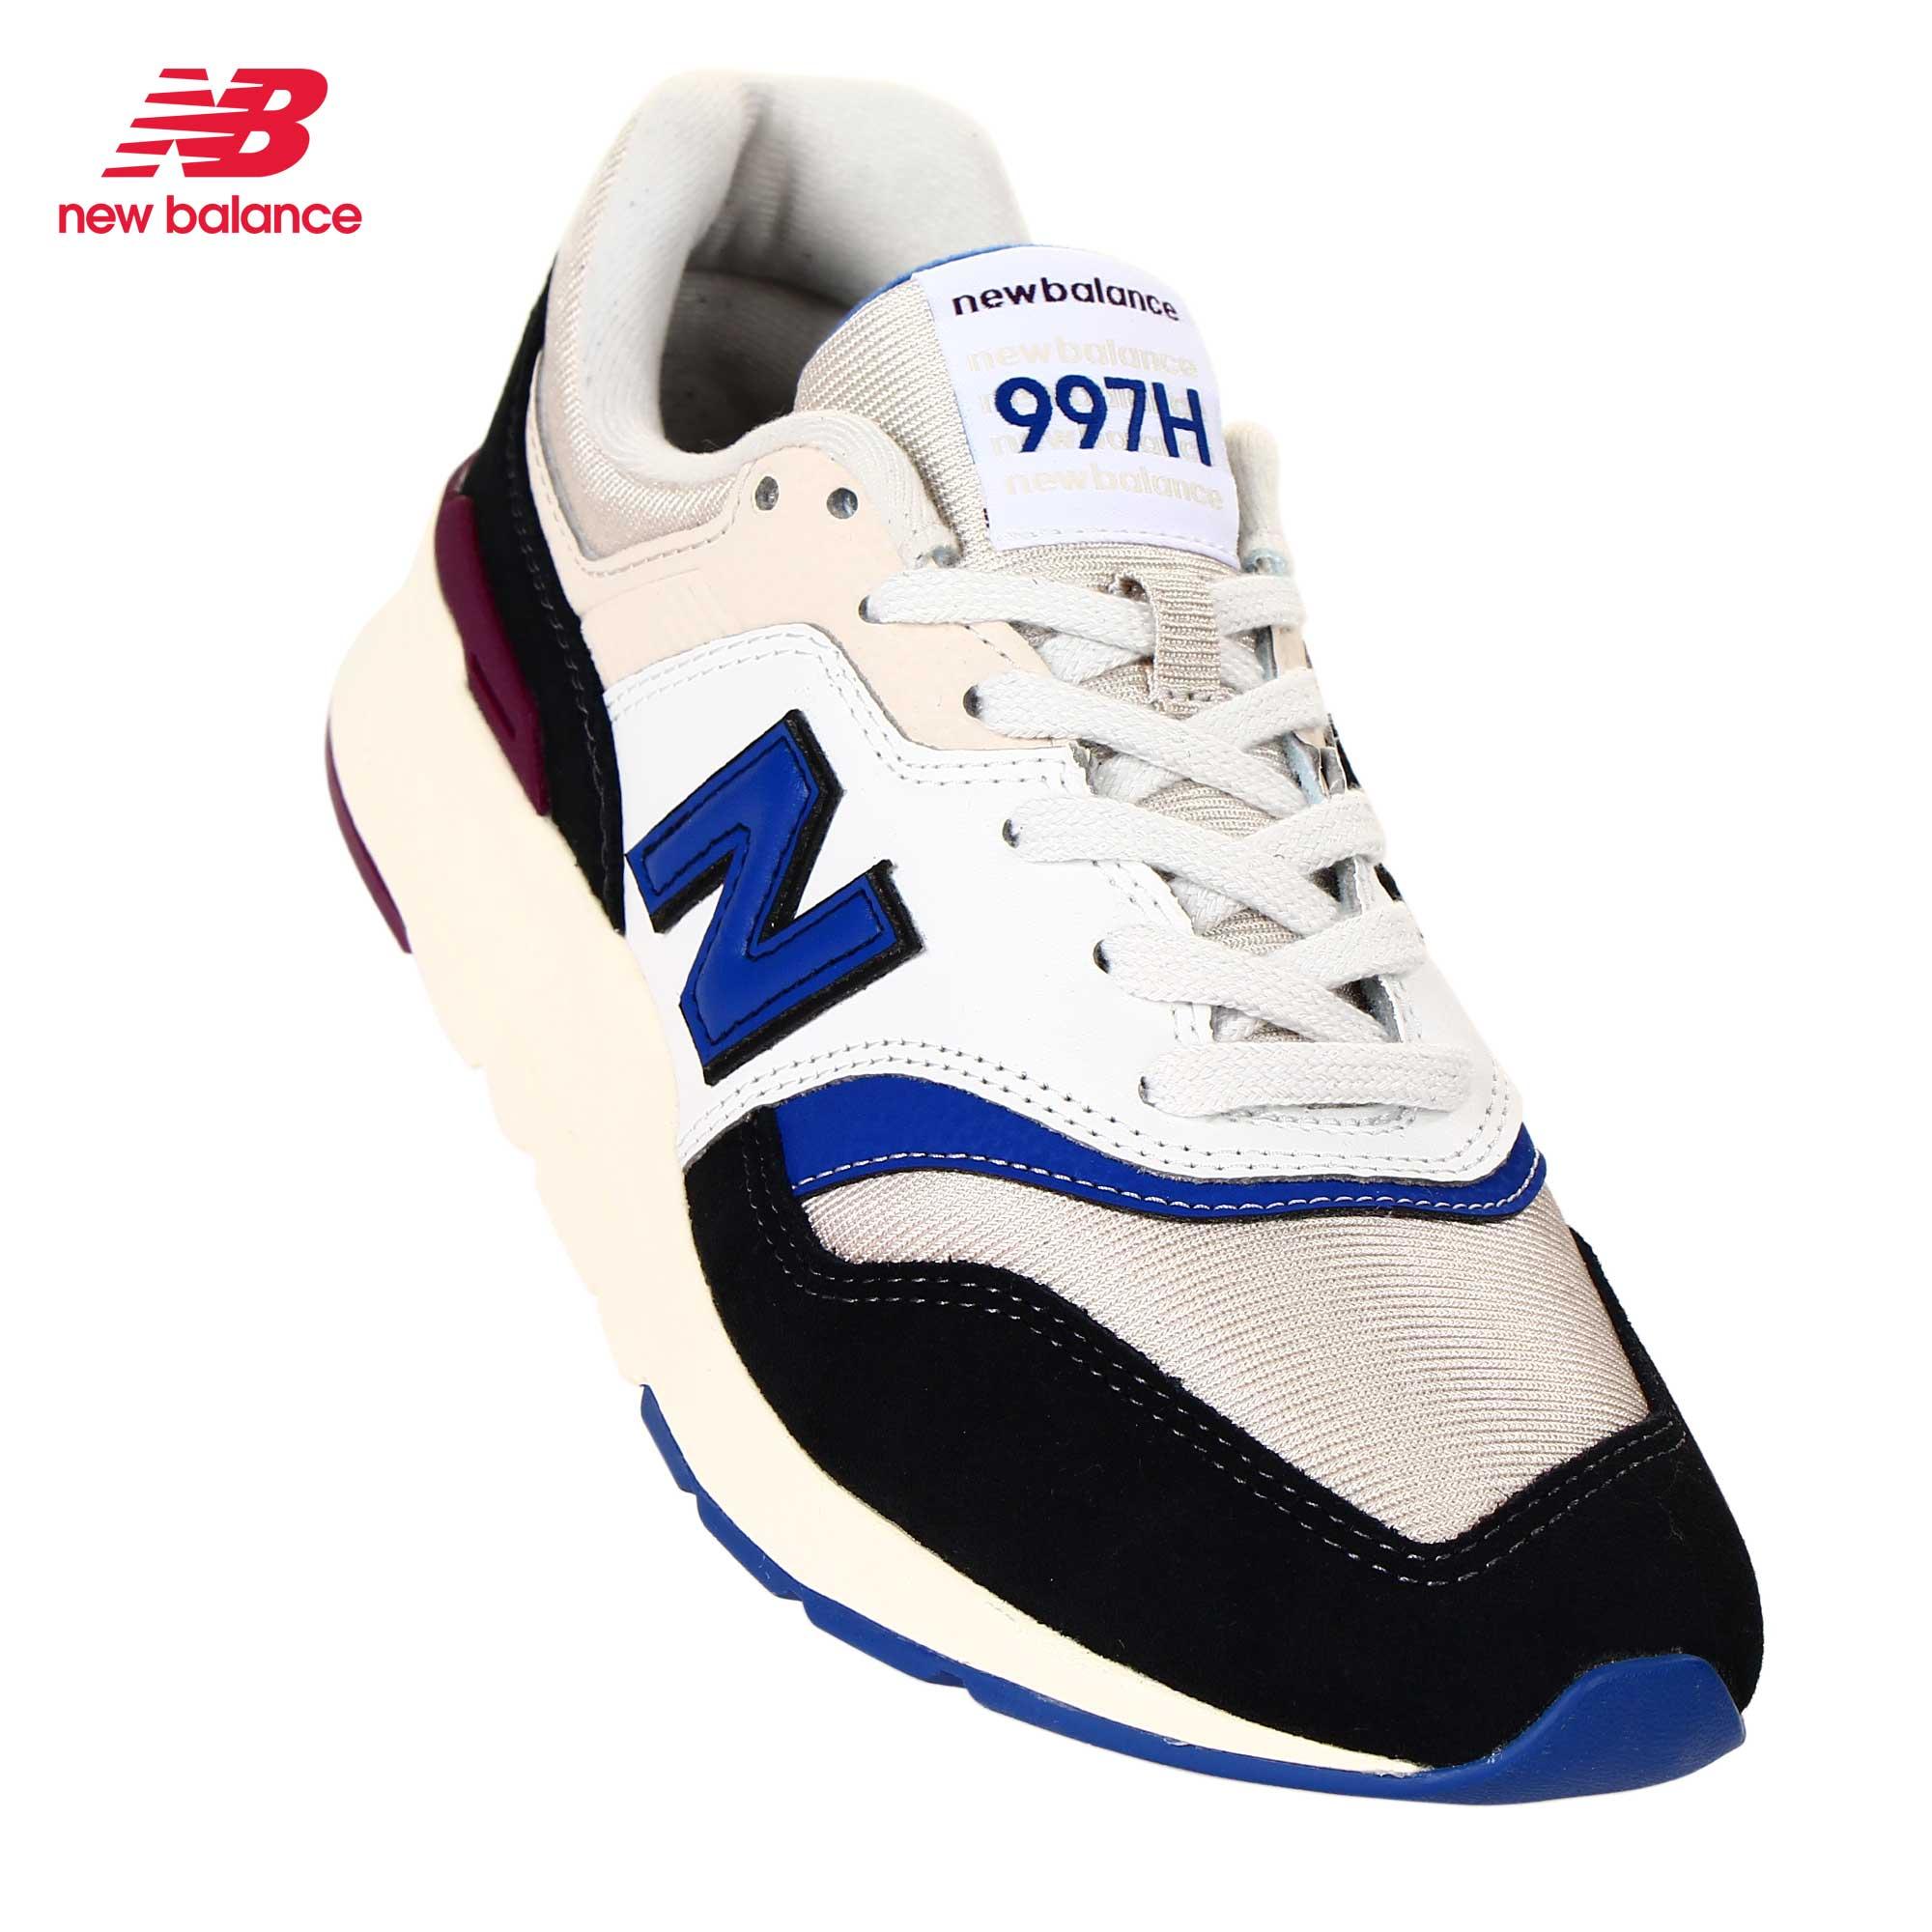 new balance 997h for sale